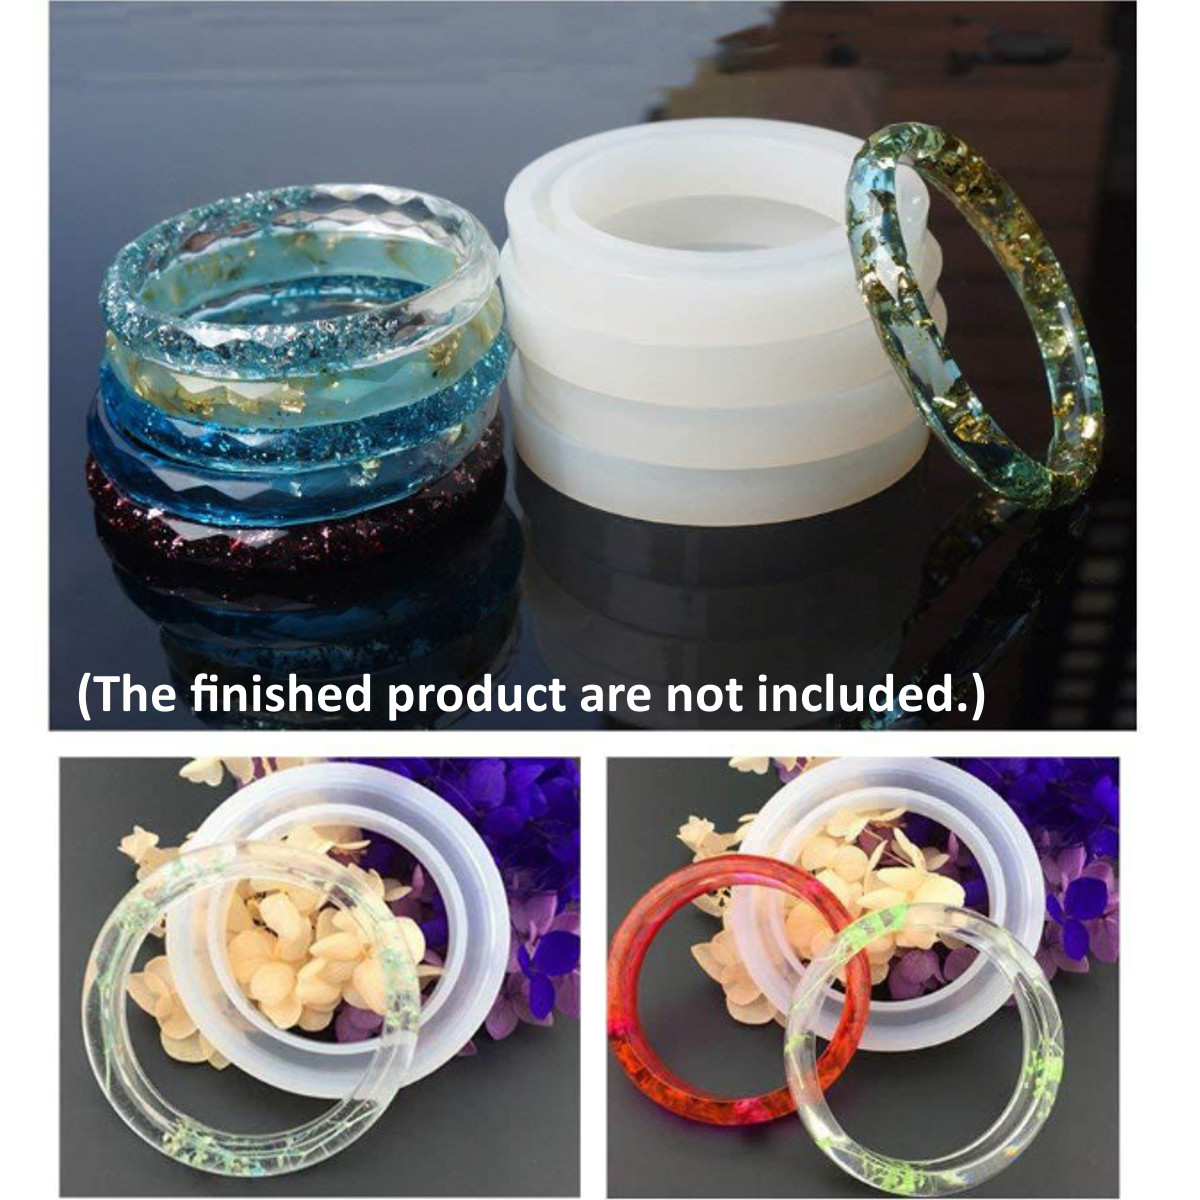 213Pcs-DIY-Epoxy-Resin-Casting-Molds-Kit-Silicone-Jewelry-Pendant-Craft-Making-Mould-1656483-5